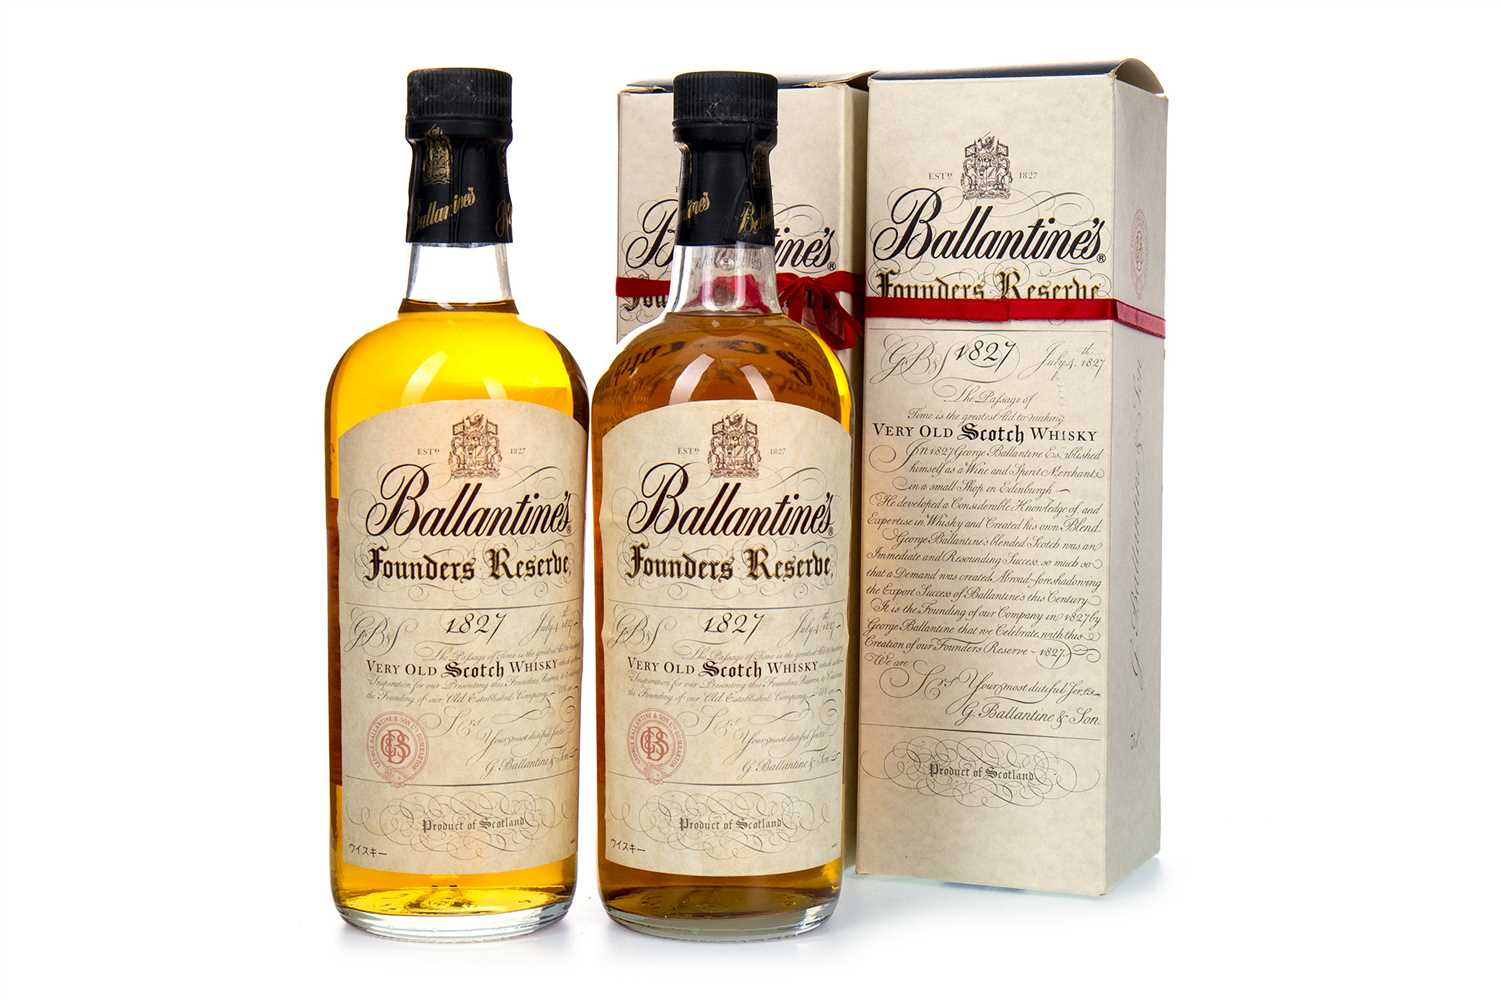 Lot 32 - TWO BOTTLES OF BALLANTINES FOUNDER'S RESERVE